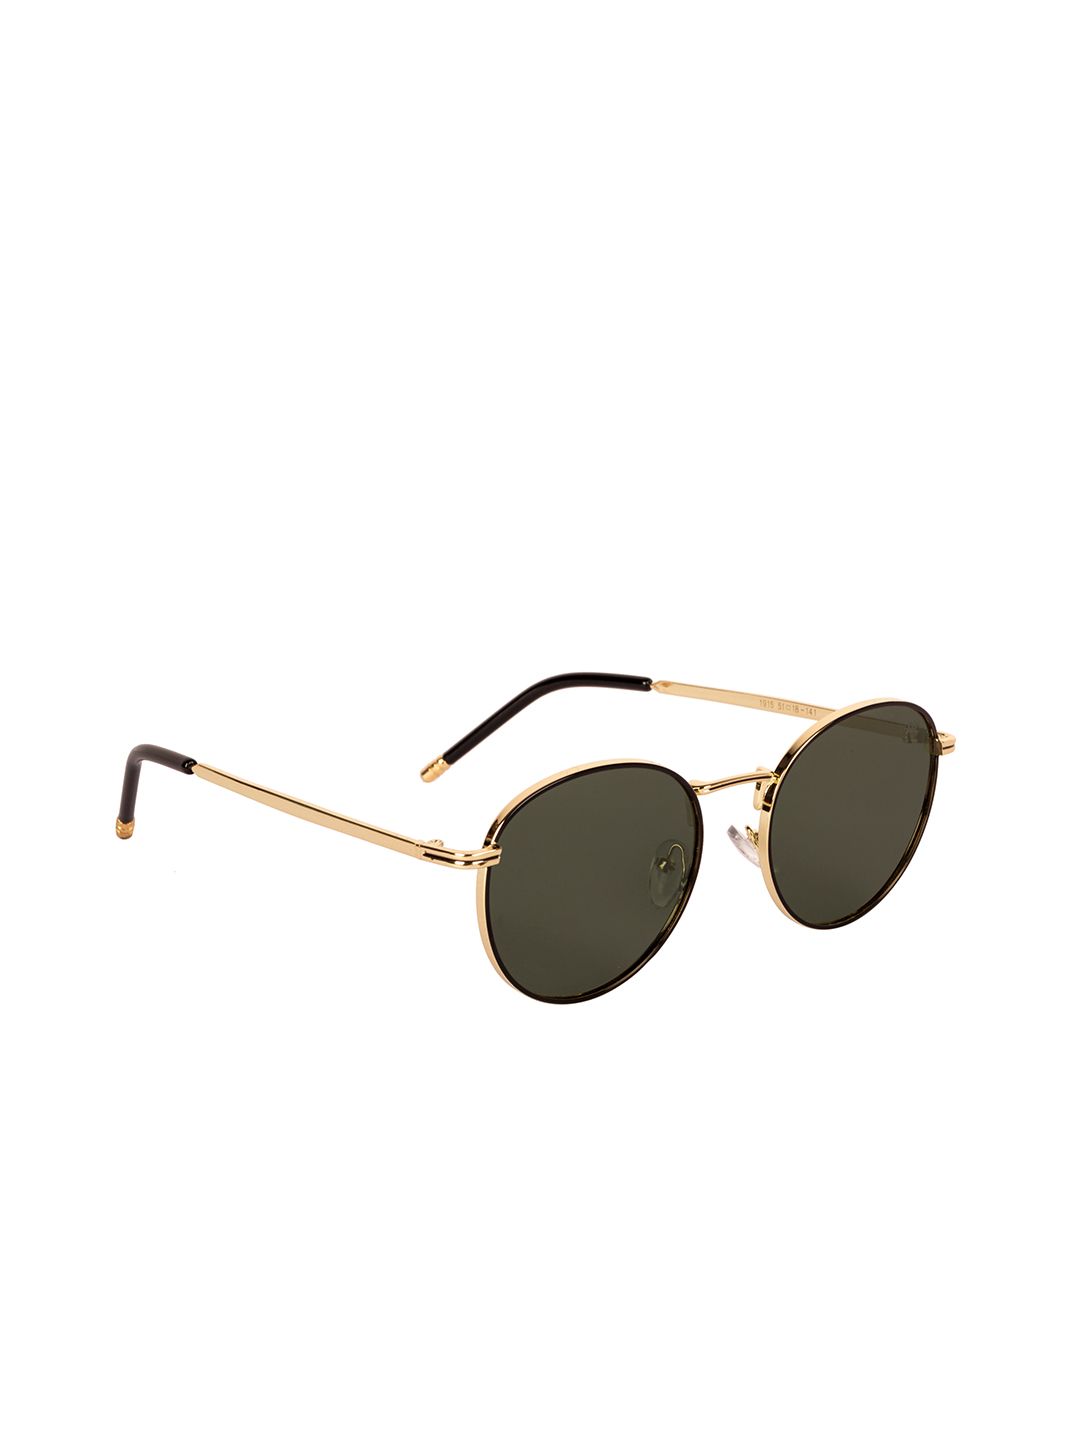 Voyage Unisex Green Lens & Gold-Toned Round Sunglasses with UV Protected Lens 1915MG3624 Price in India